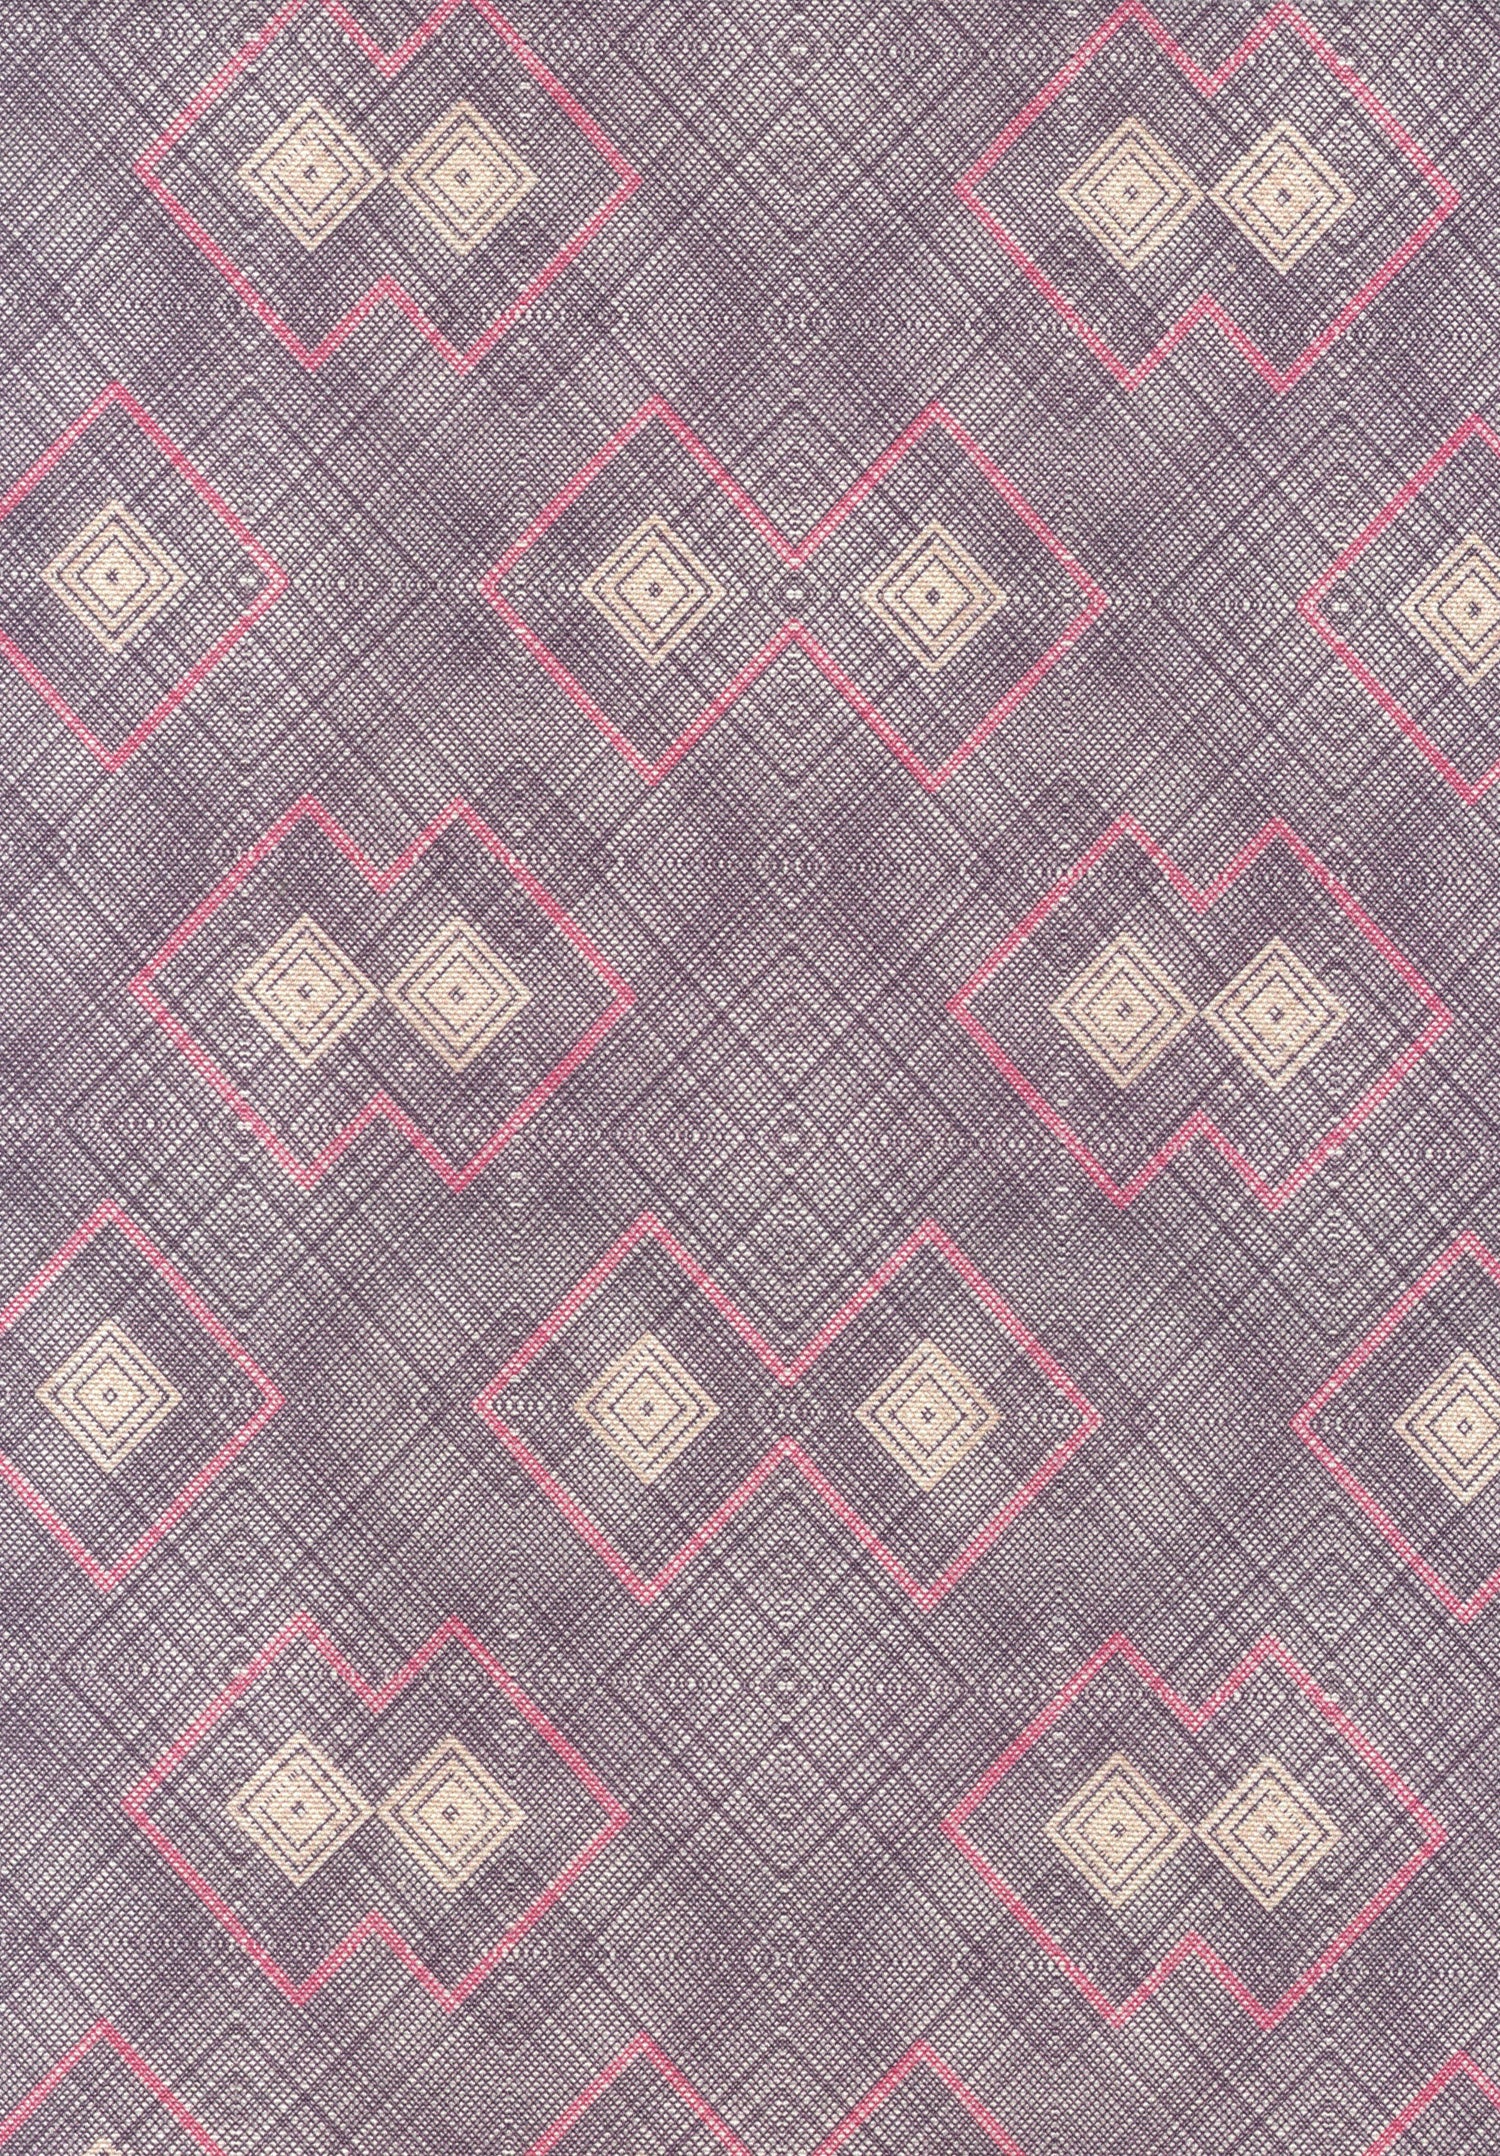 Detail of fabric in a detailed diamond lattice print in shades of pink and tan on a purple field.